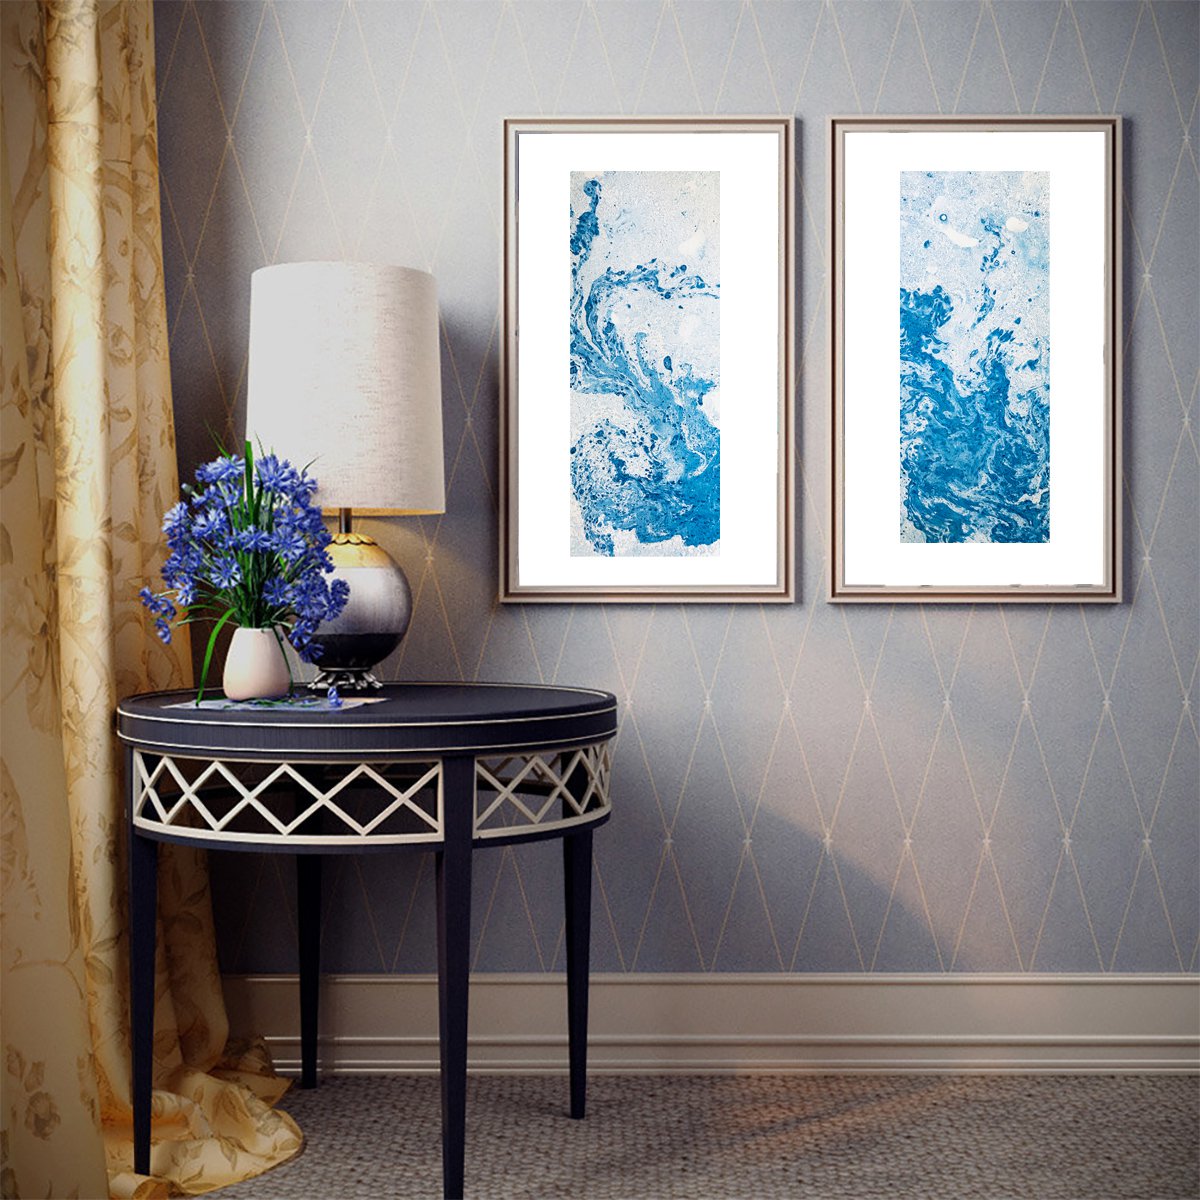 White and blue abstracts (2 artworks) by Natalya Burgos